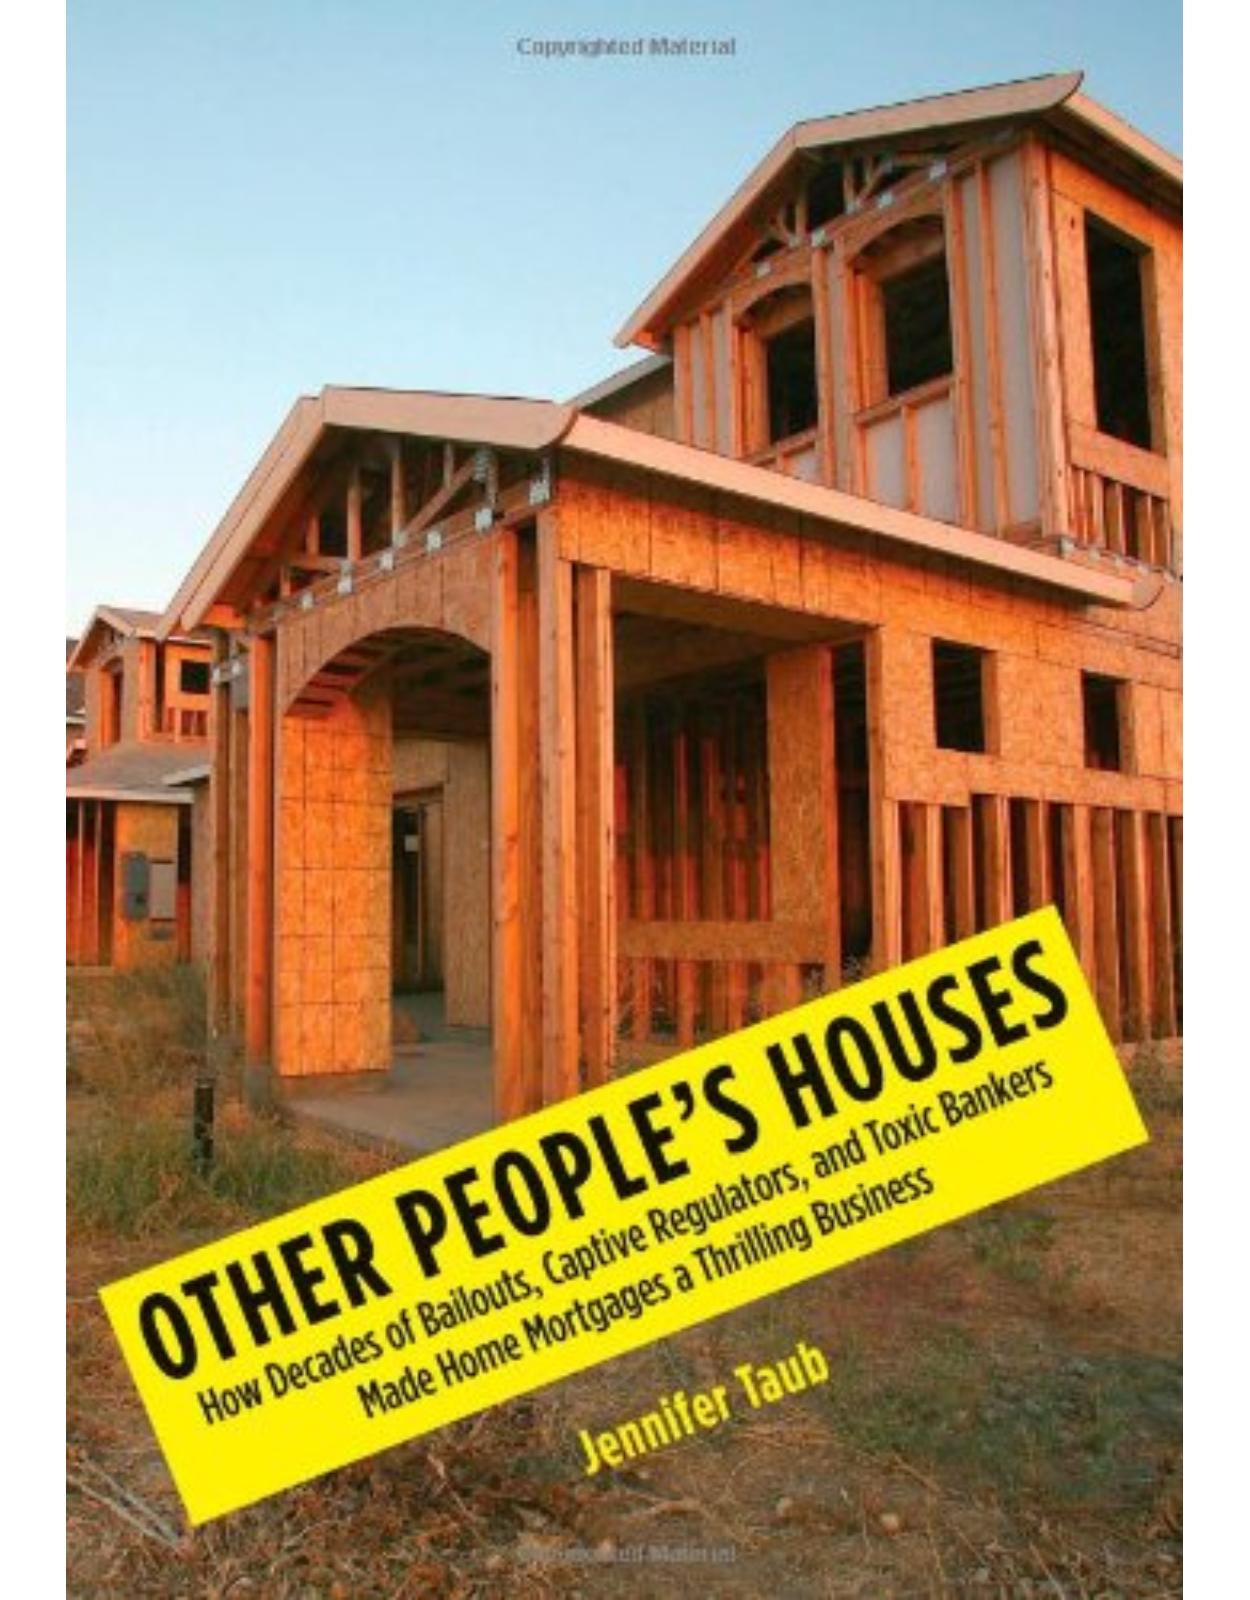 Other People's Houses. How Decades of Bailouts, Captive Regulators, and Toxic Bankers Made Home Mortgages a Thrilling Business